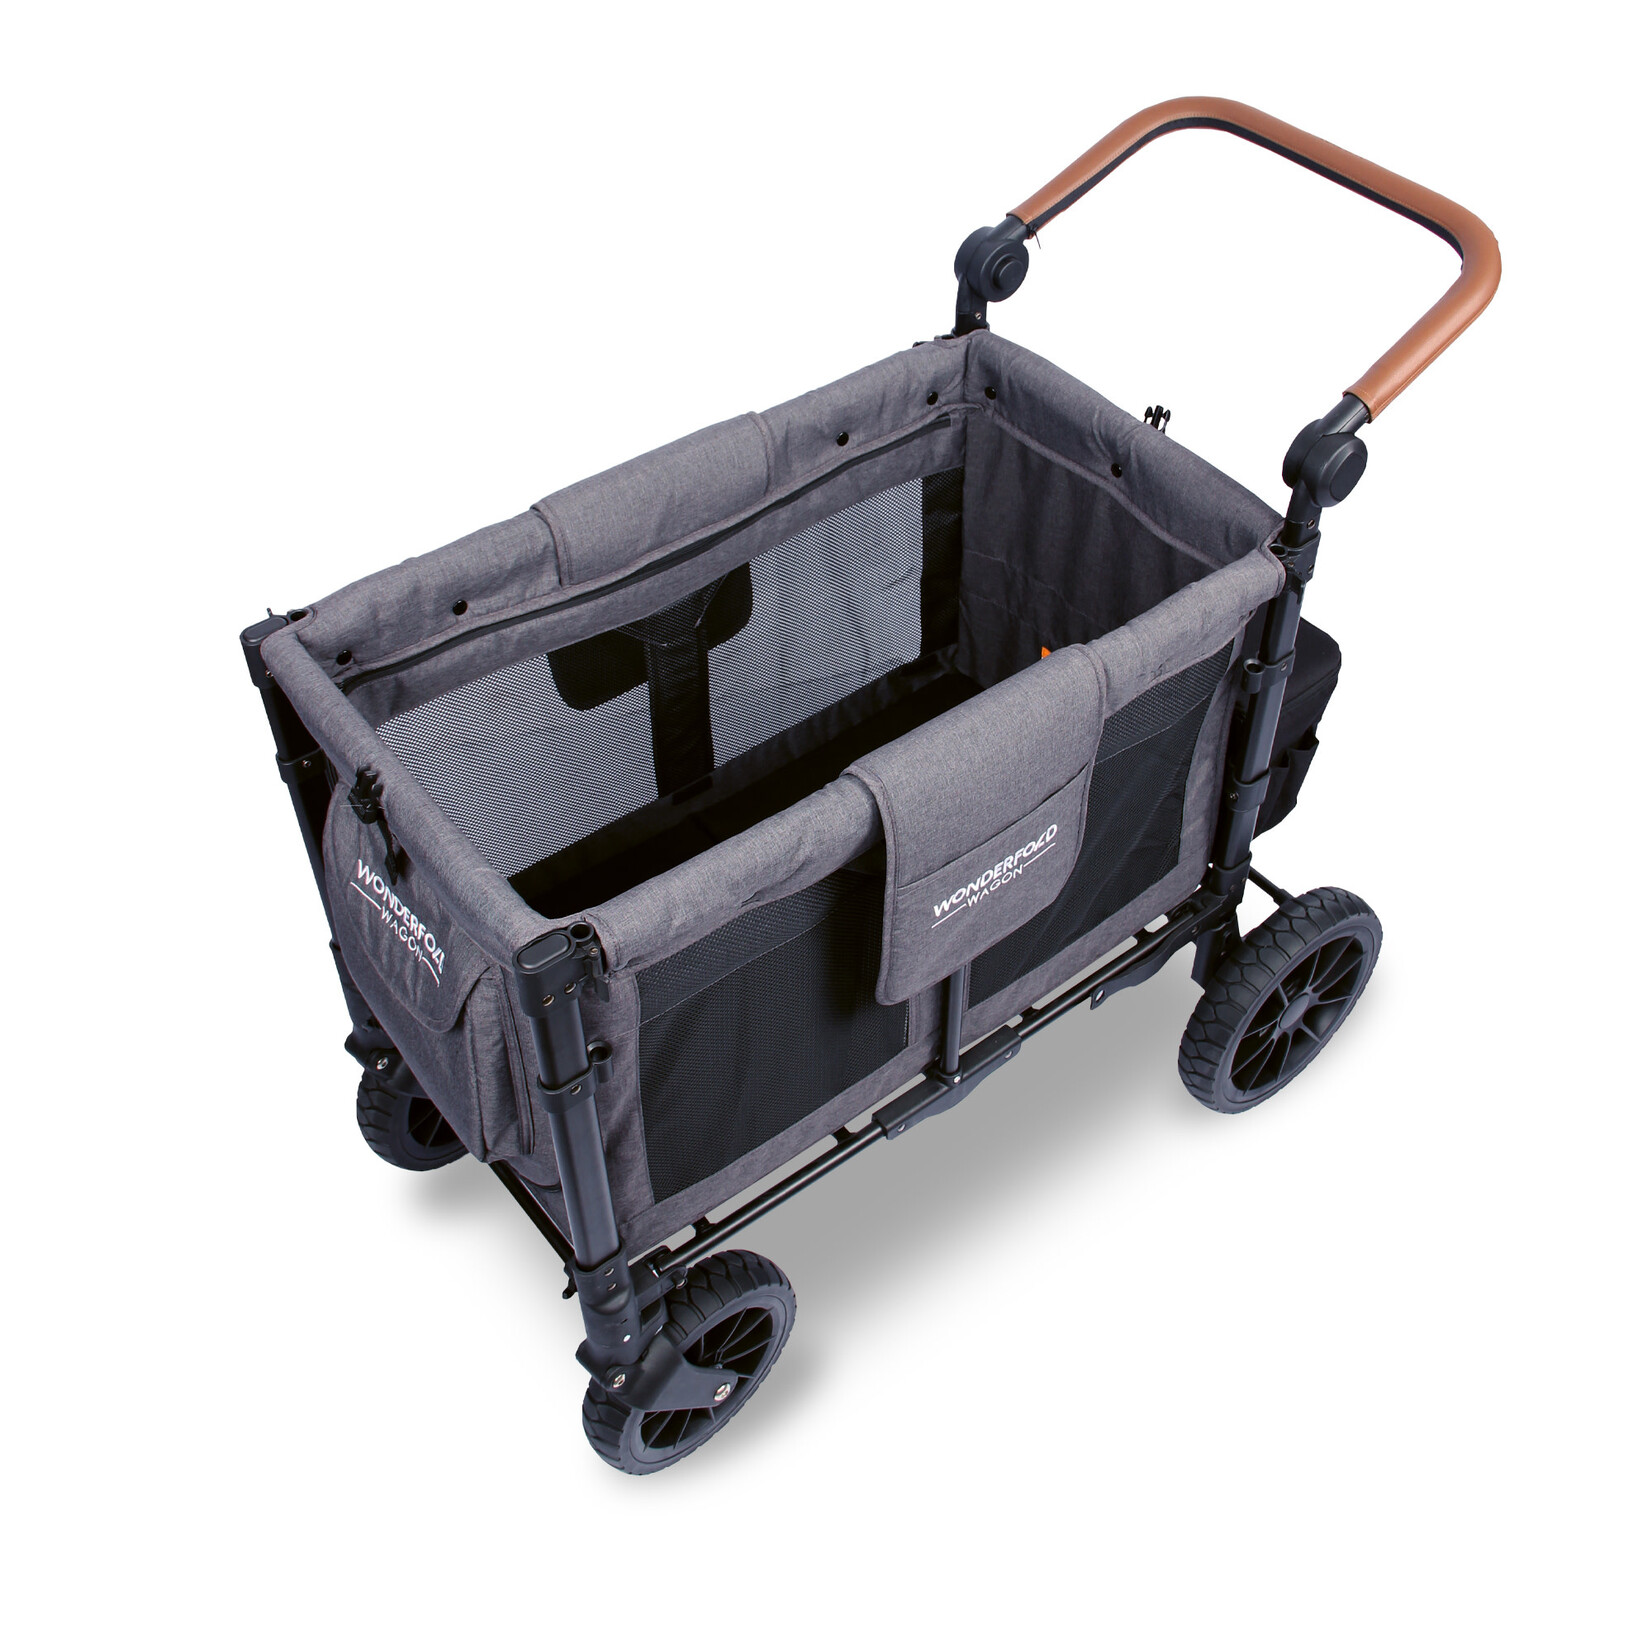 Wonderfold W2 Luxe - Double Wagon - Charcoal Grey with Black Frame